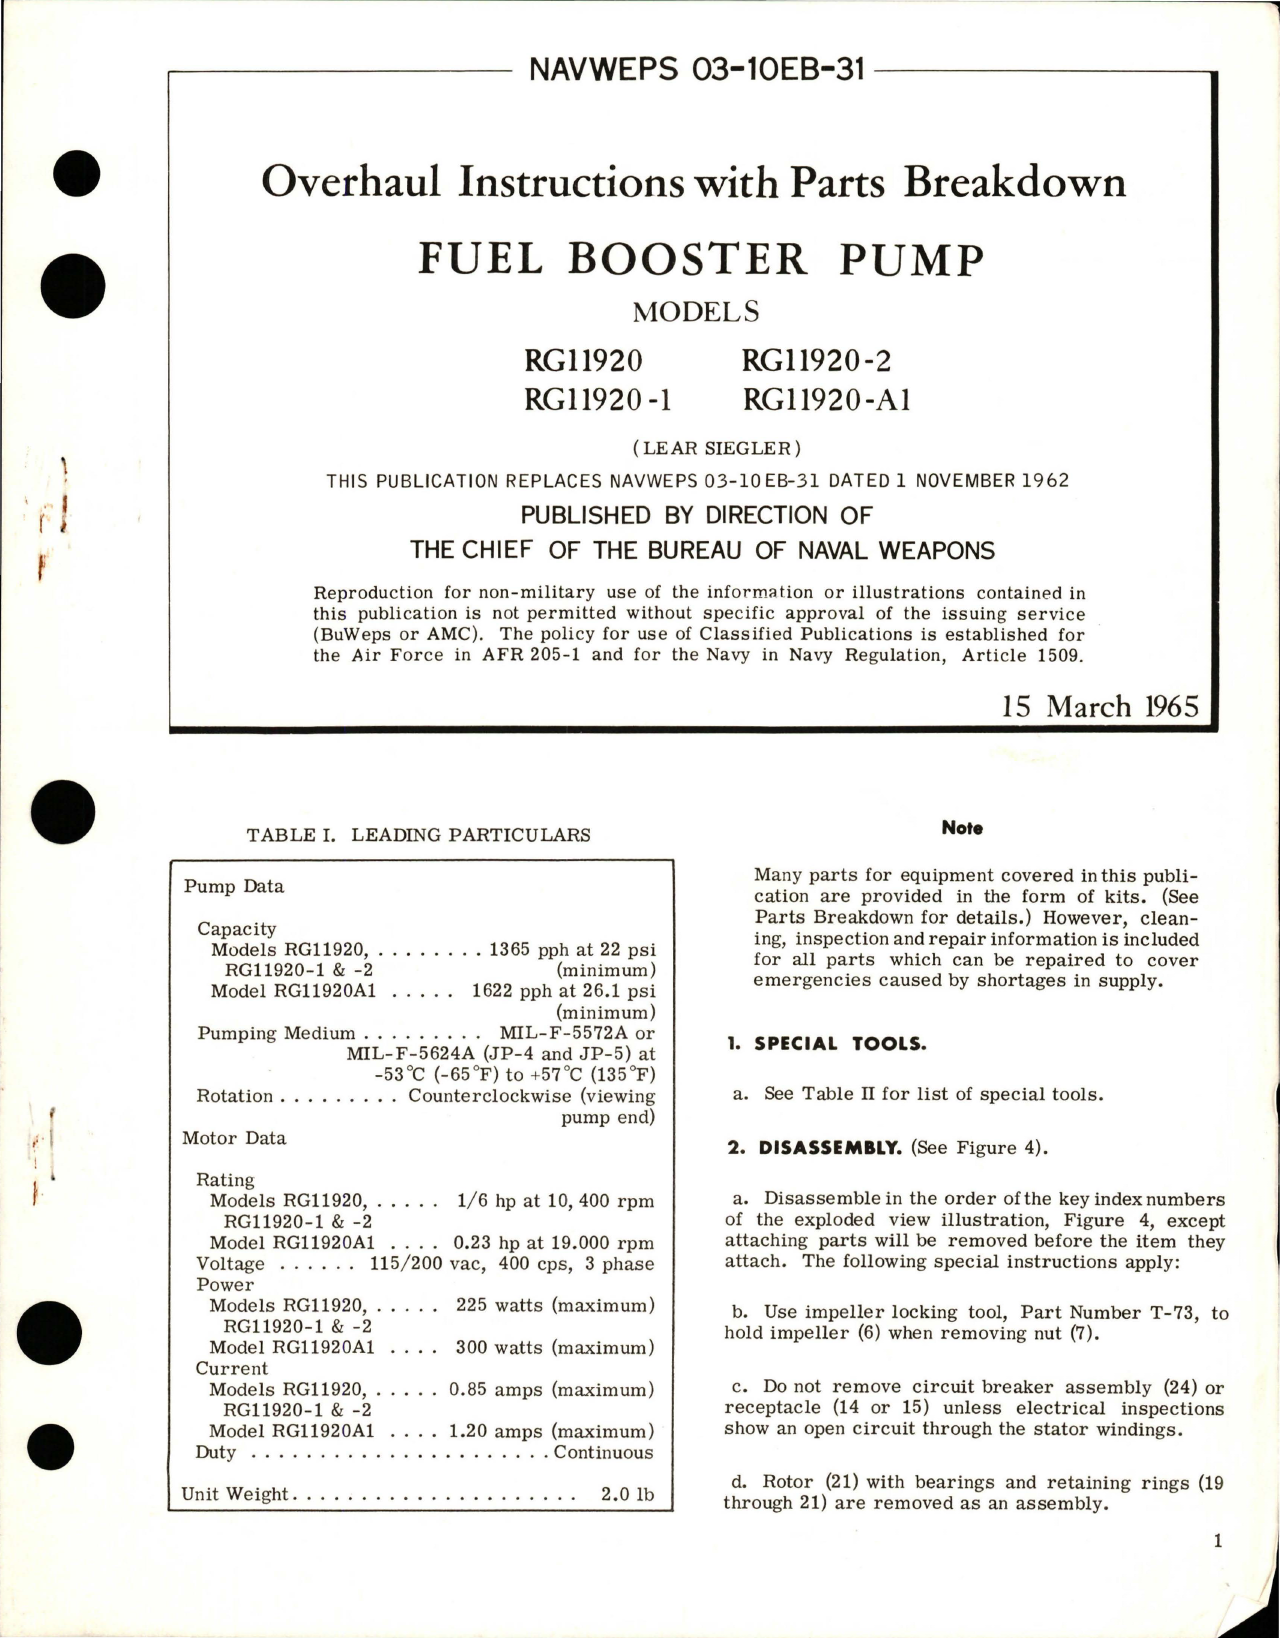 Sample page 1 from AirCorps Library document: Overhaul Instructions with Parts Breakdown for Fuel Booster Pump - Models RG11920, RG11920-1, RG11920-2, and RG11920-A1